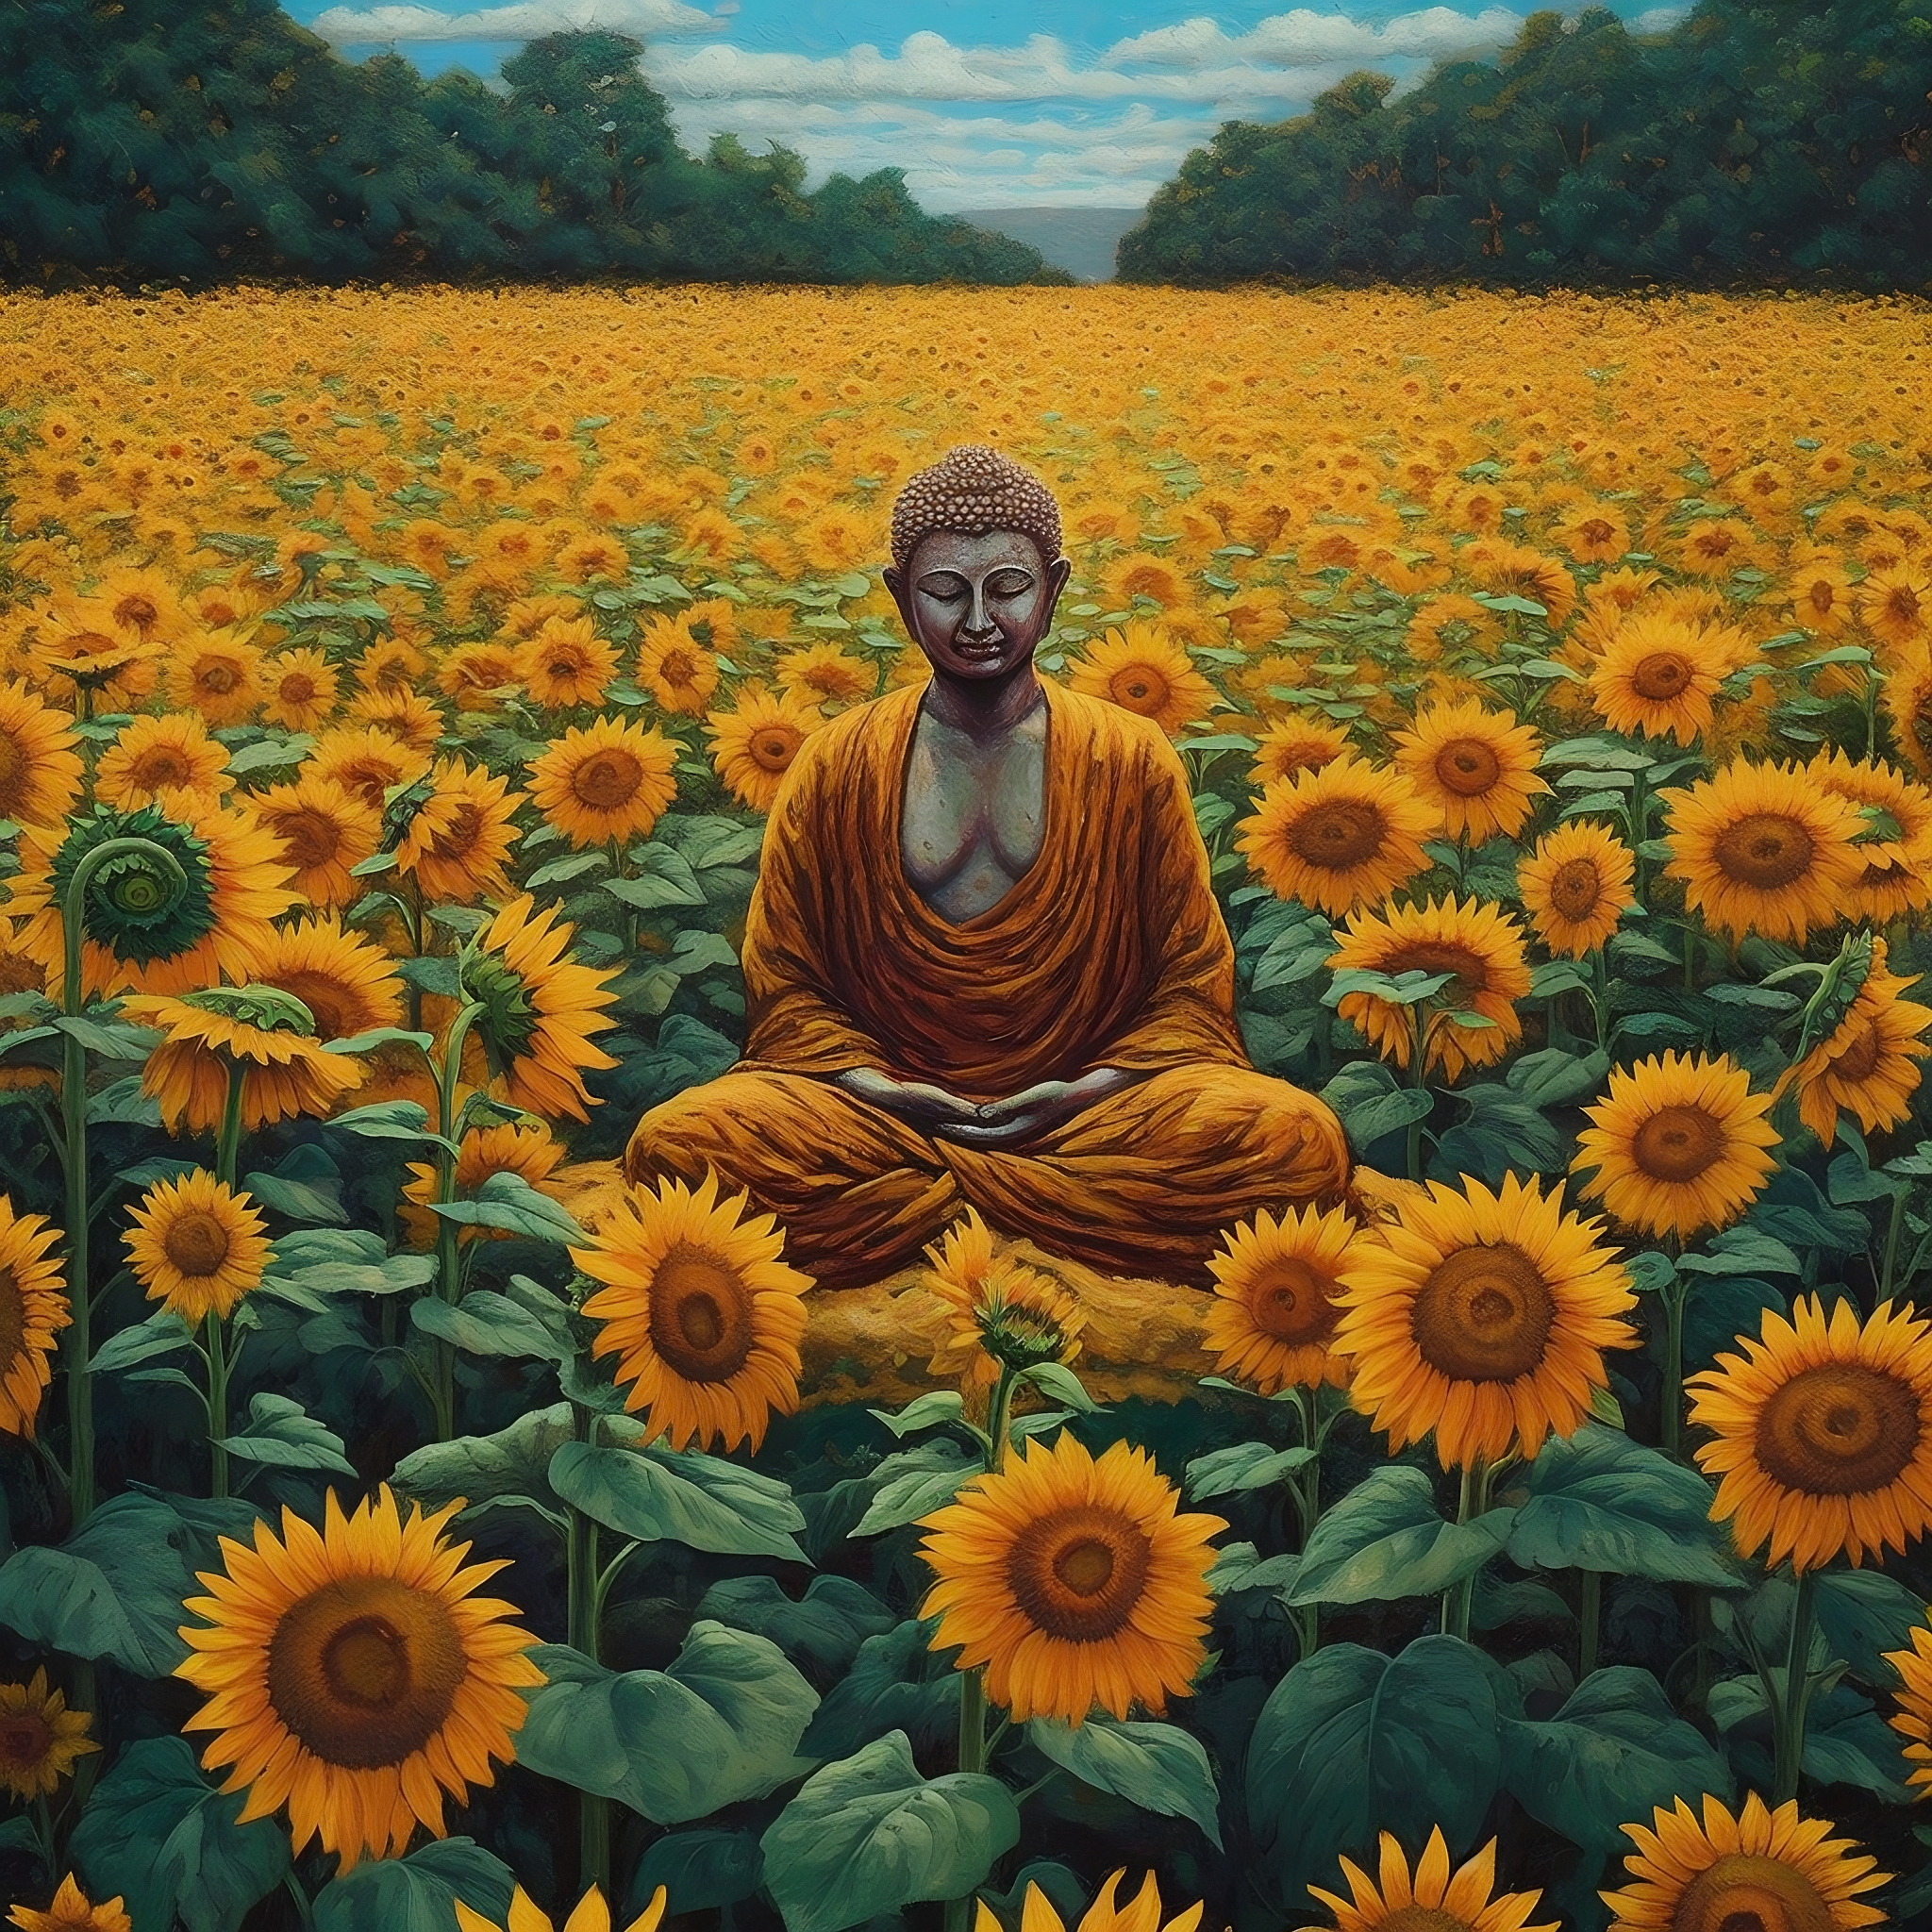 The Buddha's Tranquil Meditation Amidst a Field of Sunflowers